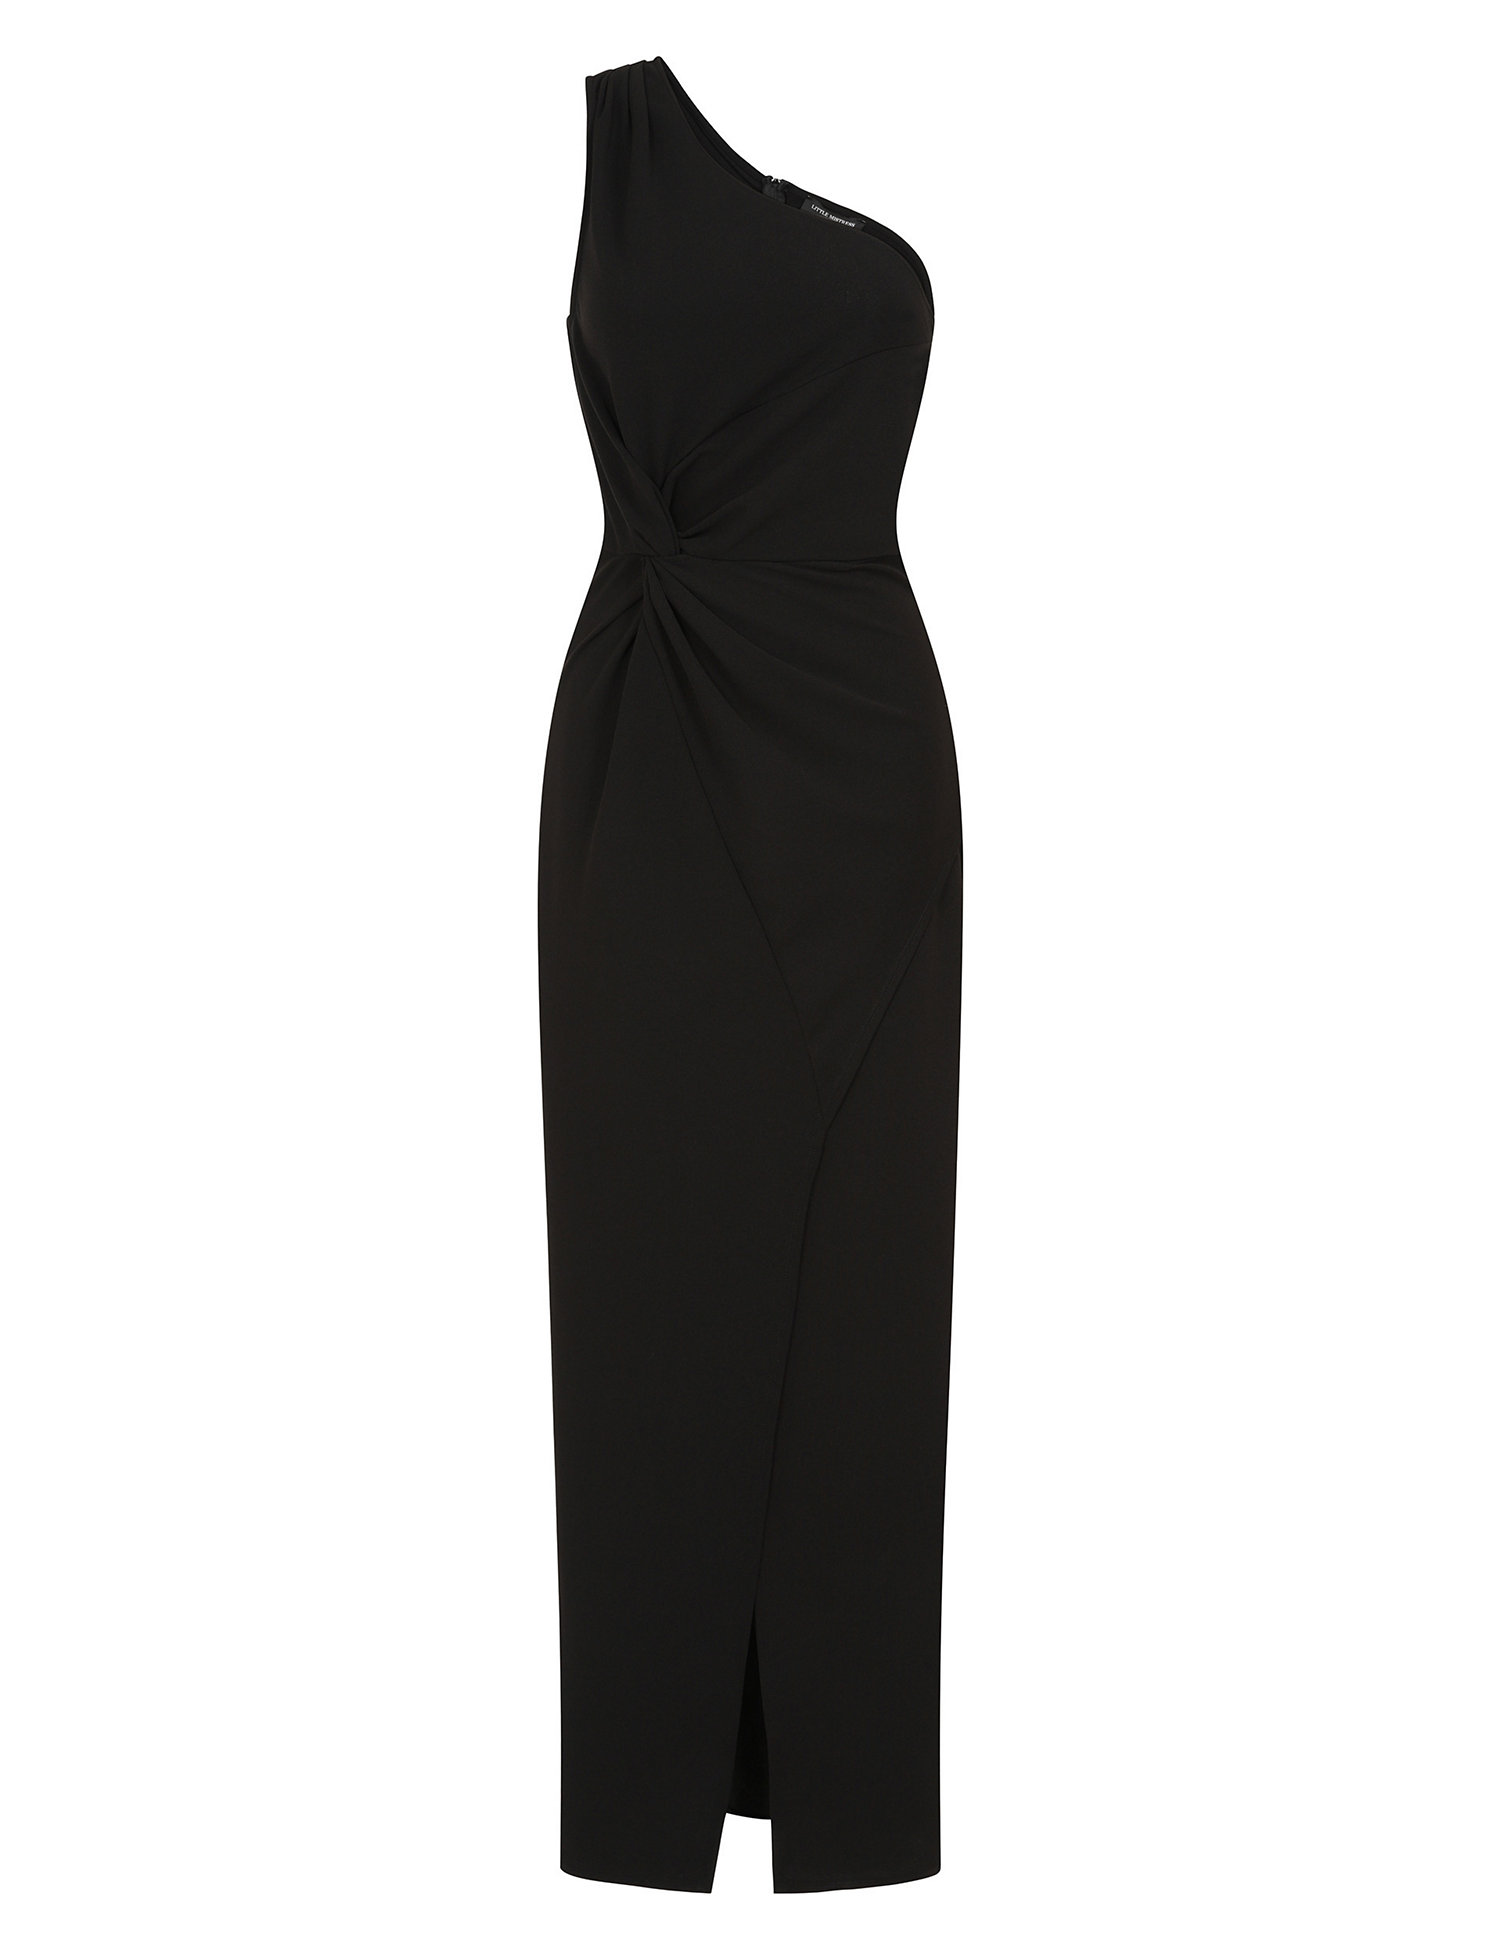 11 Long Black Dresses to Replace the LBD | Who What Wear UK